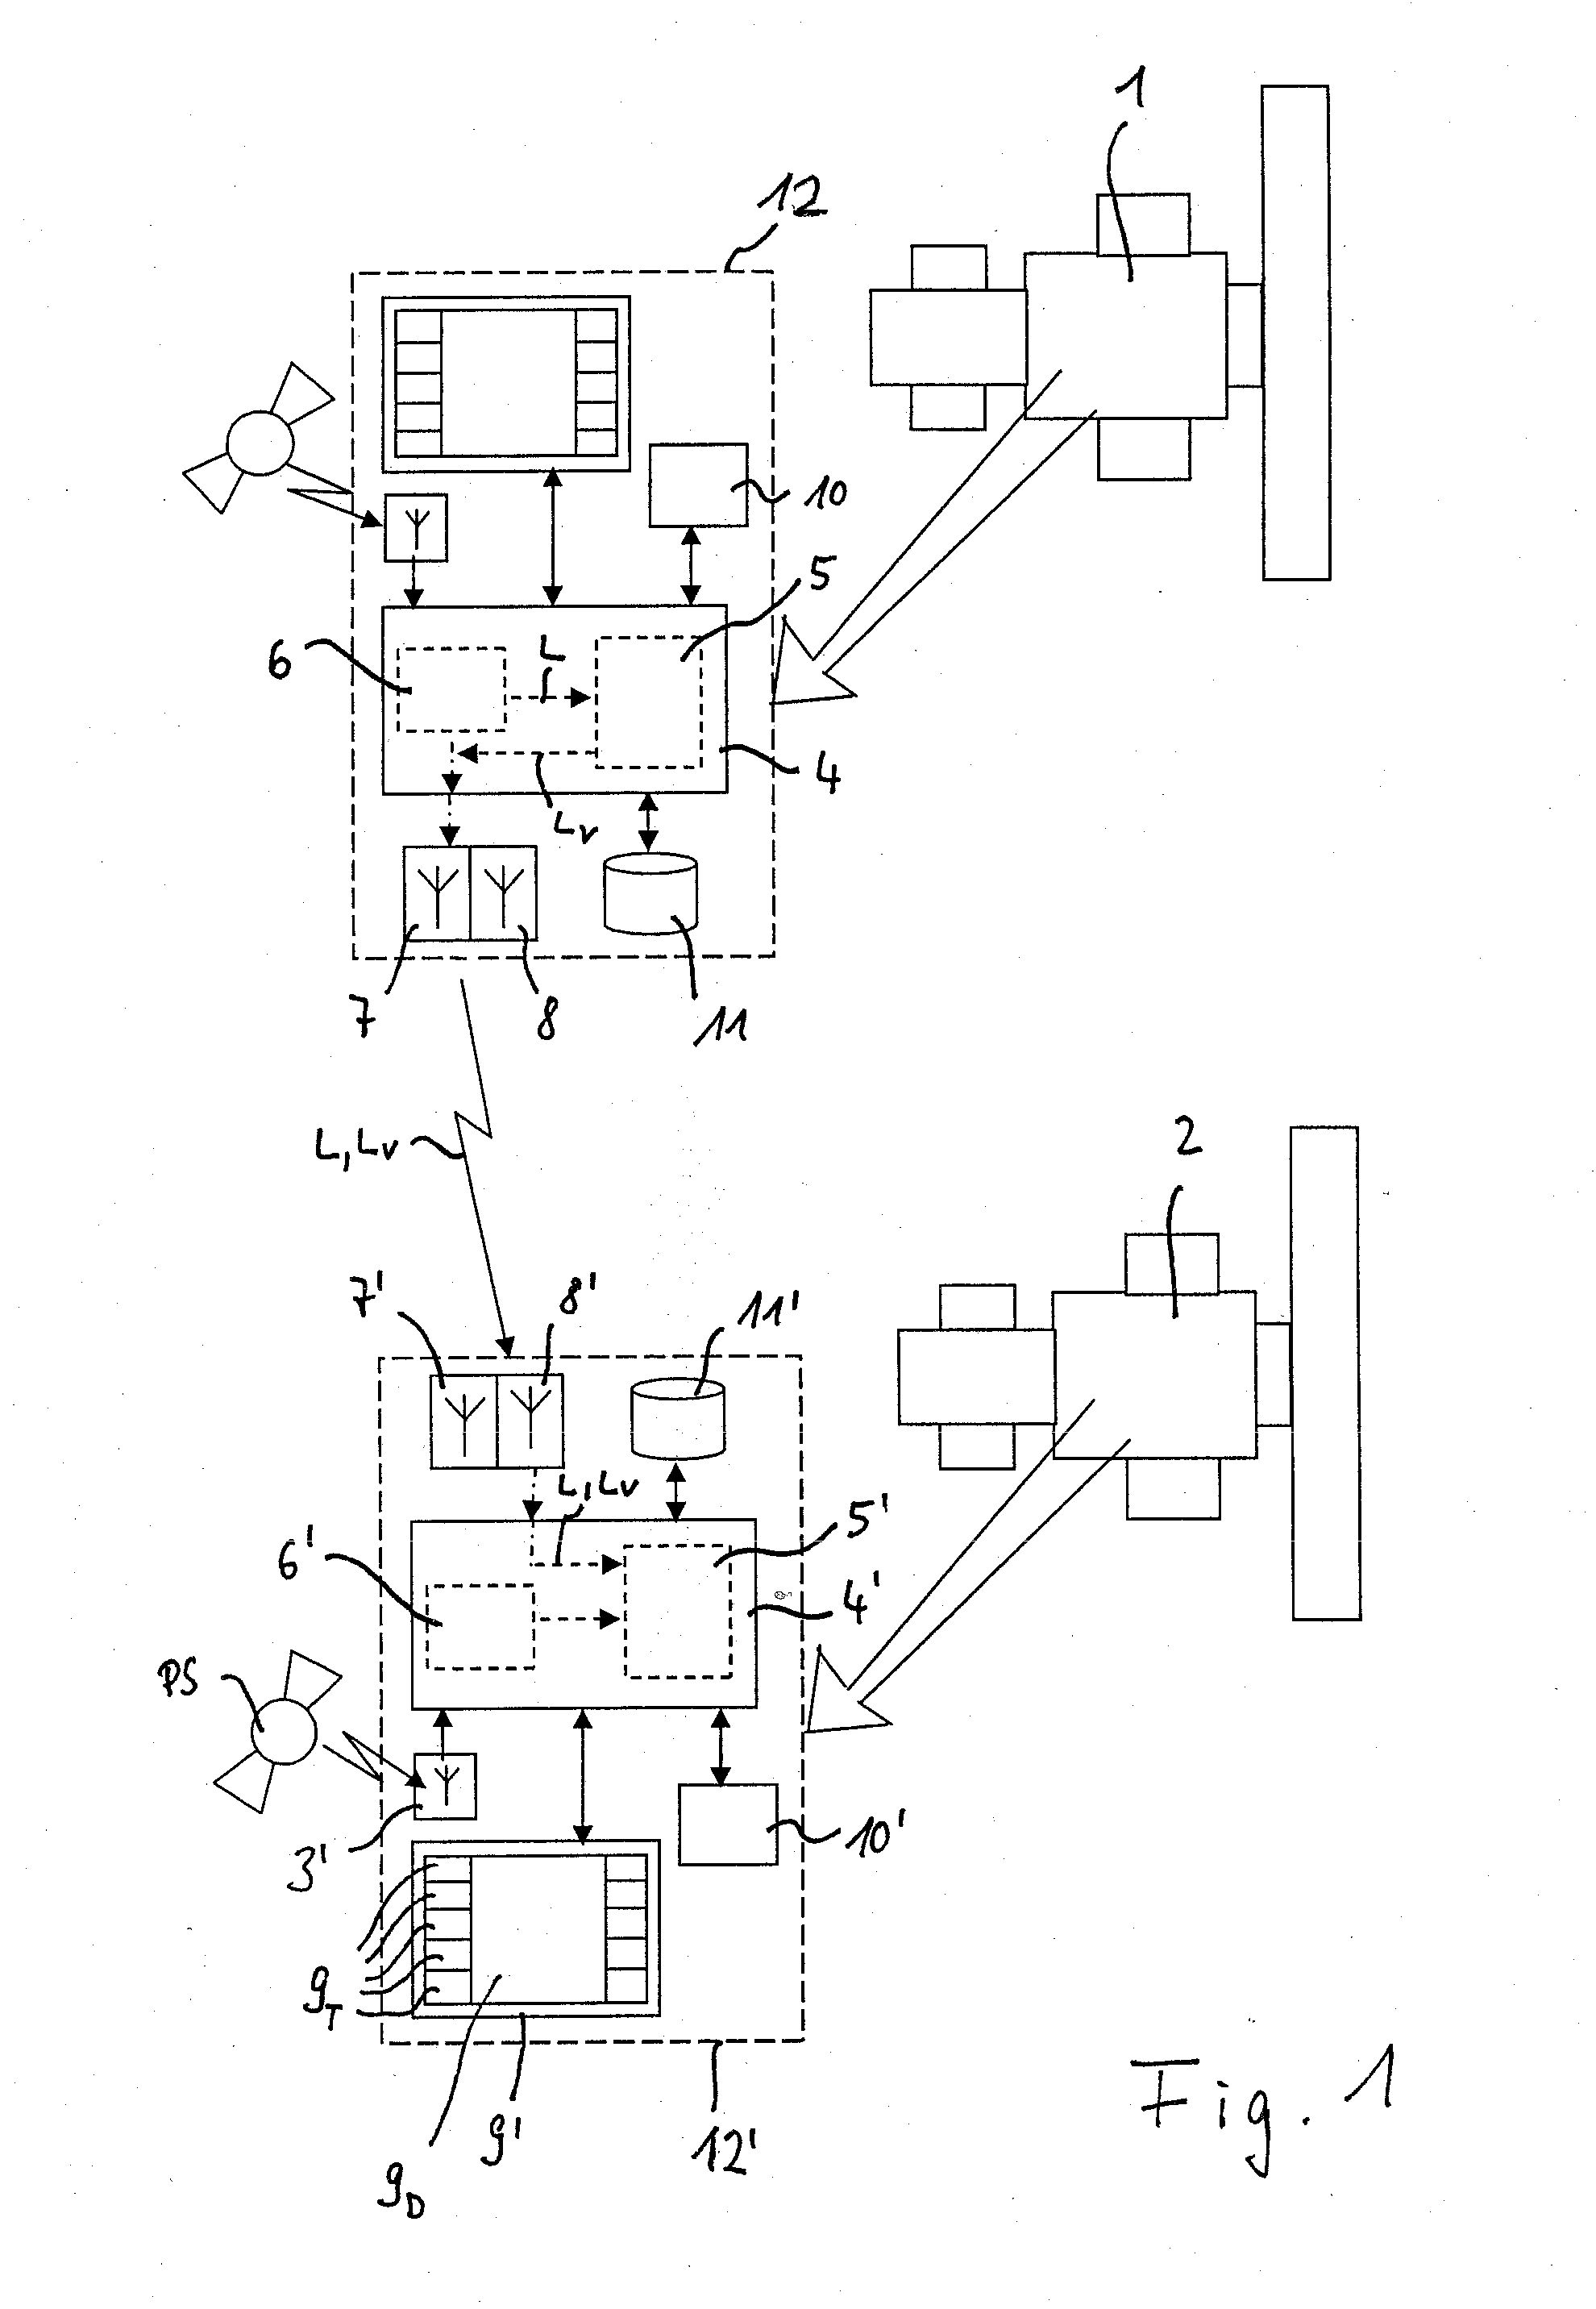 Method for controlling agricultural machine systems